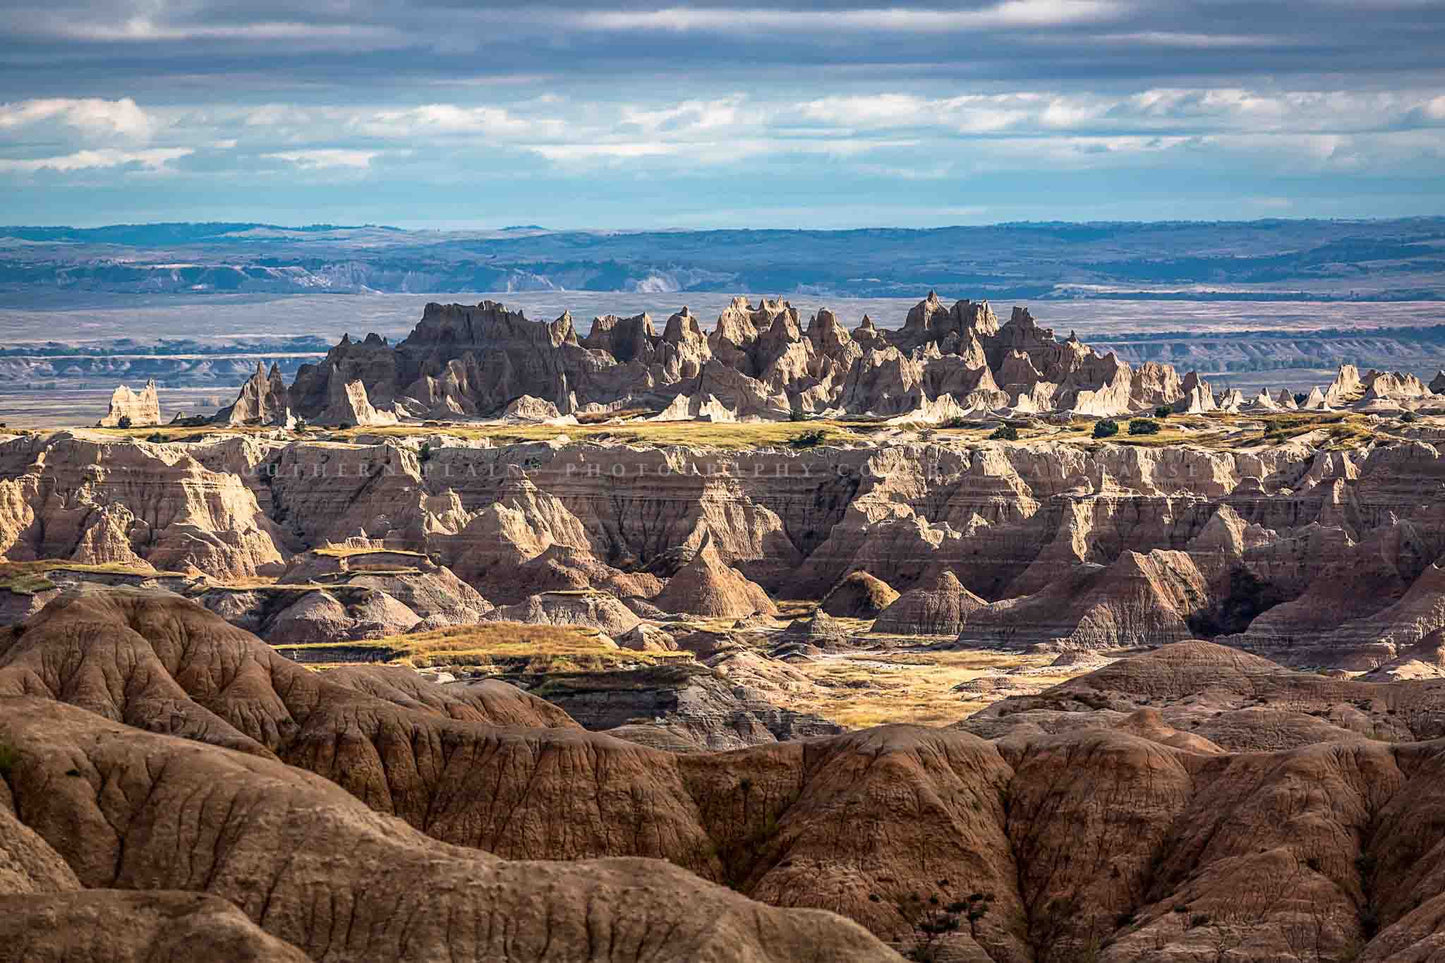 Landscape photography print of spires rising above the plains in Badlands National Park, South Dakota by Sean Ramsey of Southern Plains Photography.